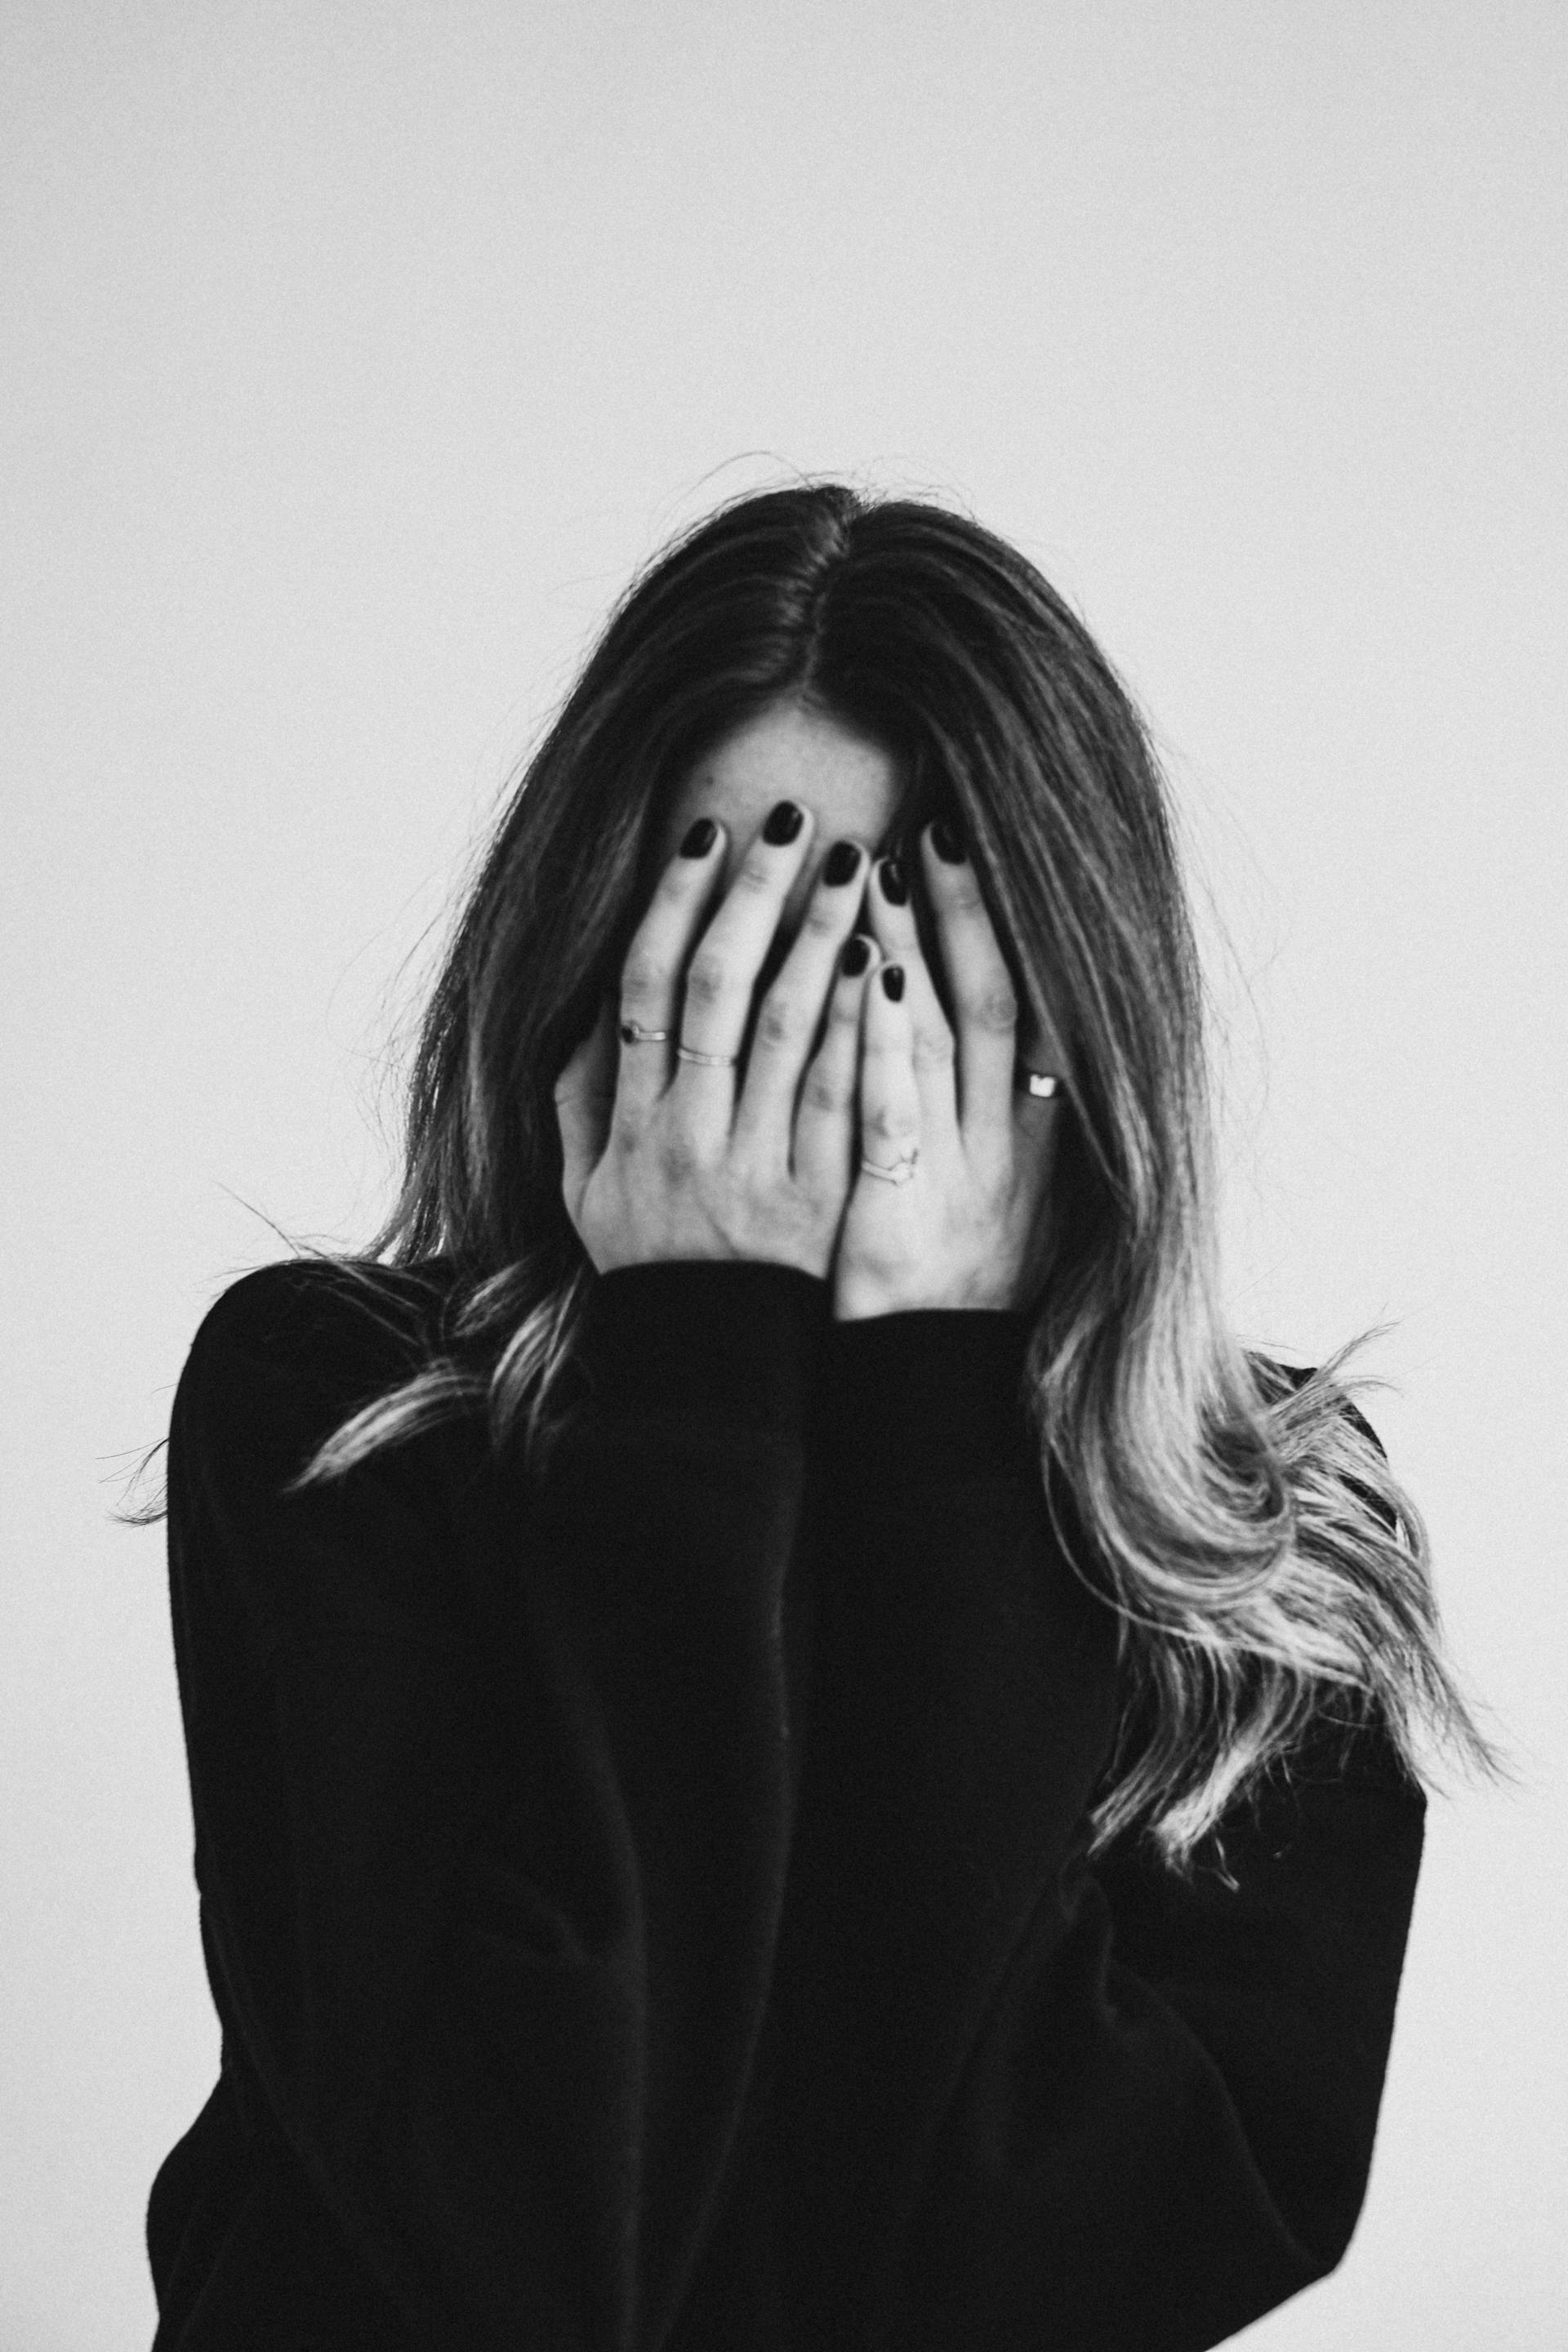 A woman covering her face | Source: Pexels